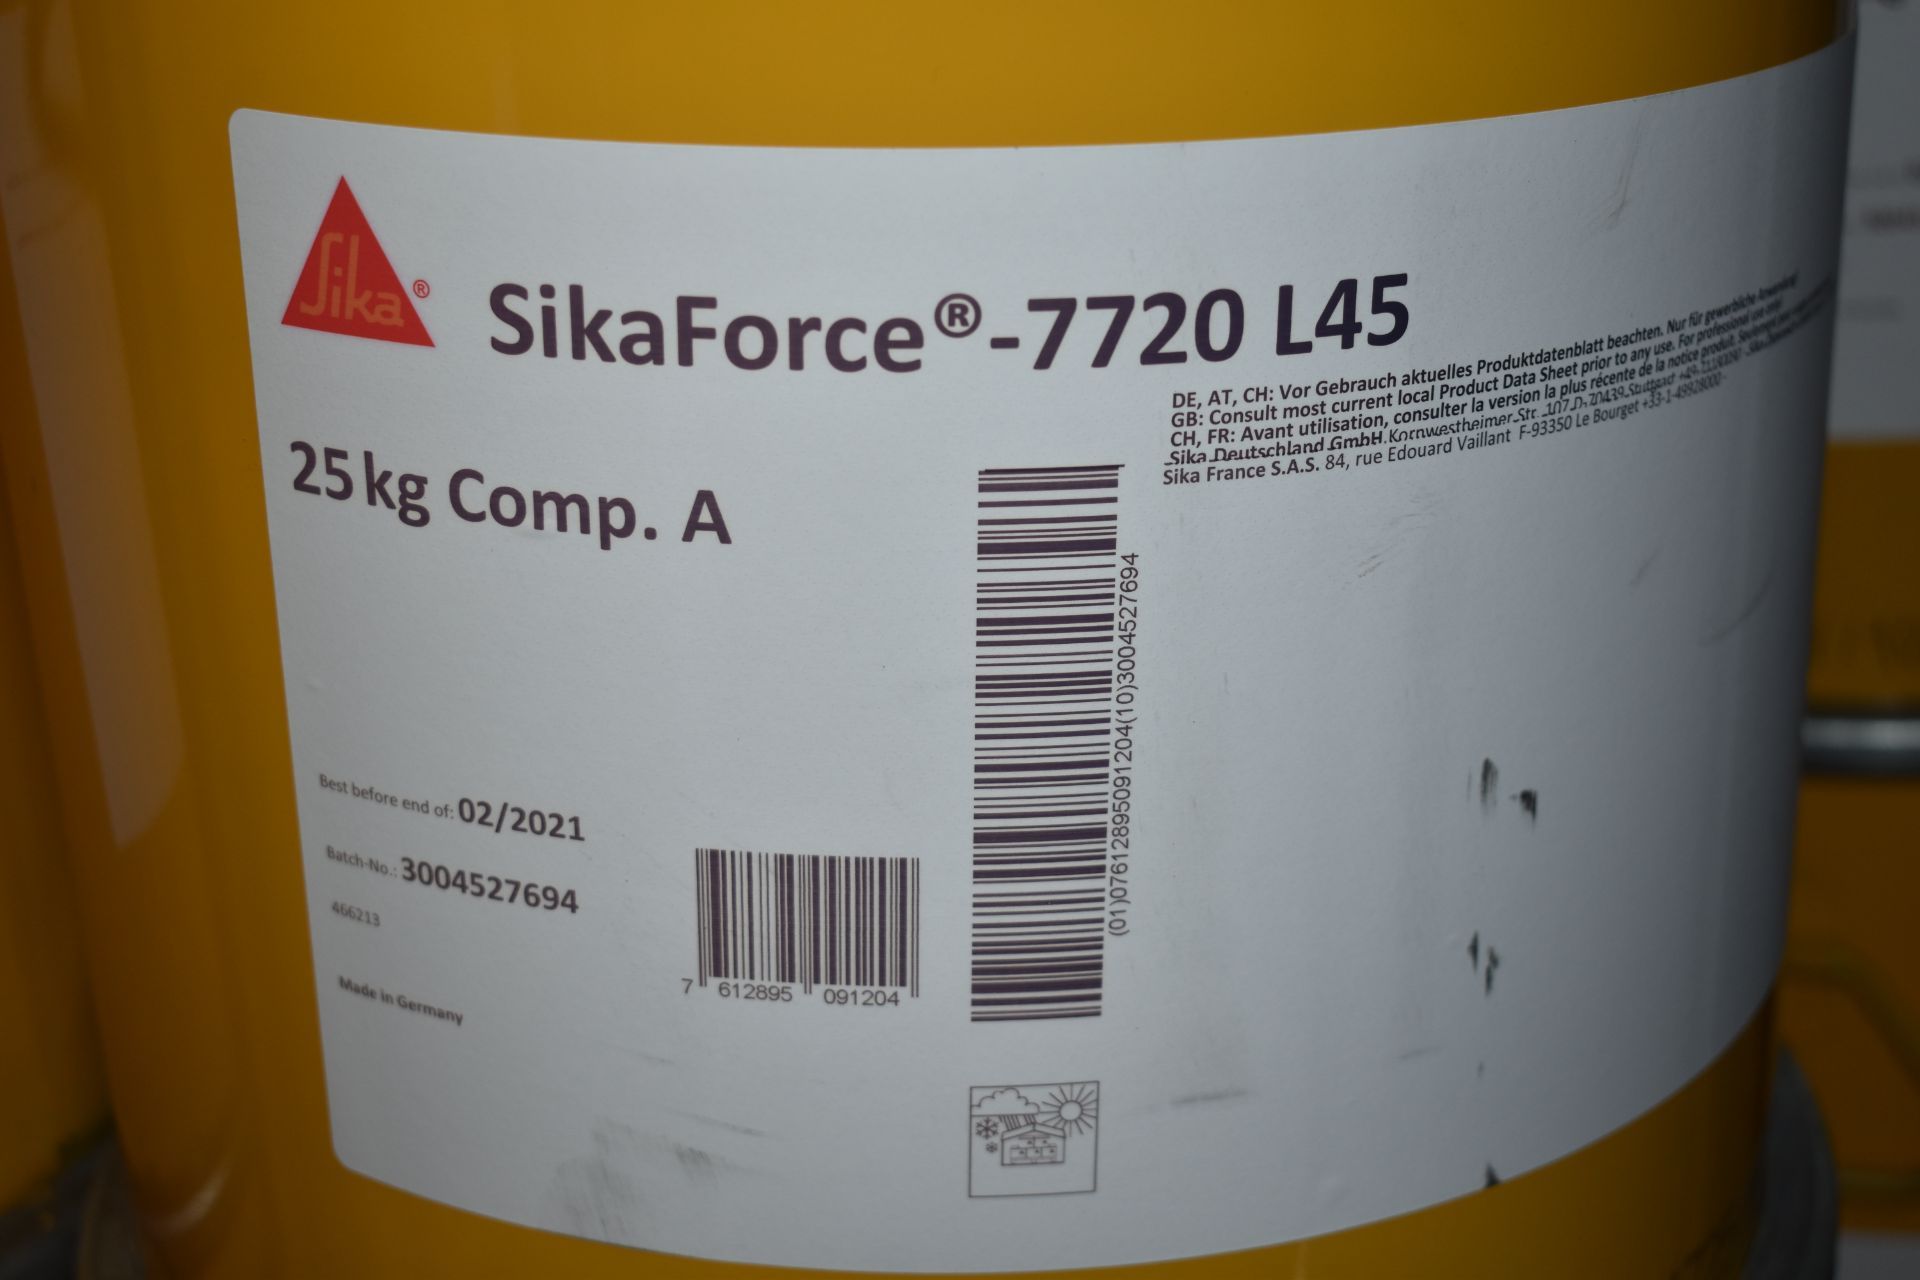 1 x SikaForce -7720 L45 None Sagging Assembly Adhesive 25kg Barrel - New Sealed Stock - CL622 - - Image 3 of 3